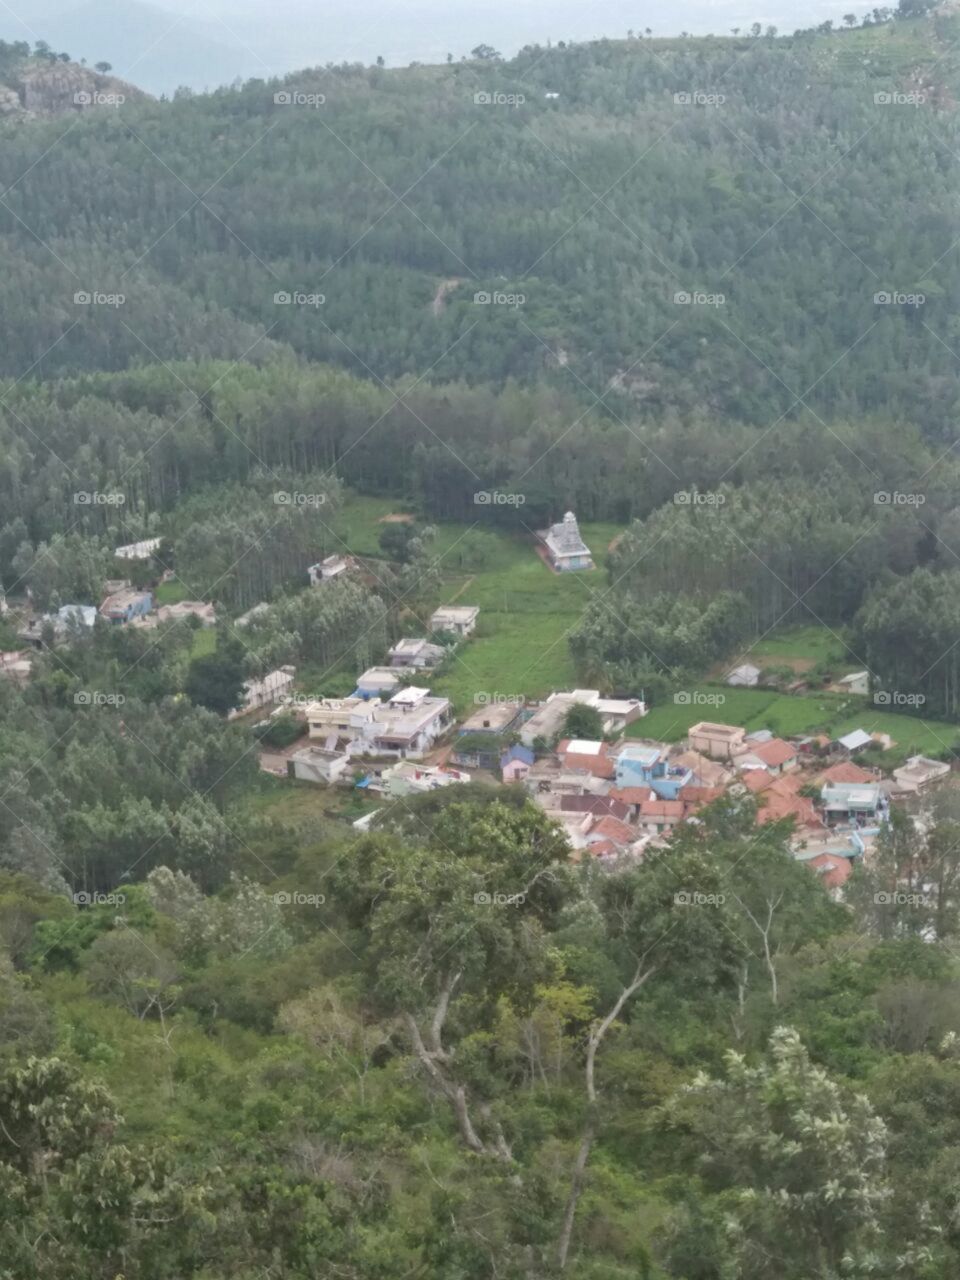 the beautiful small village and whether